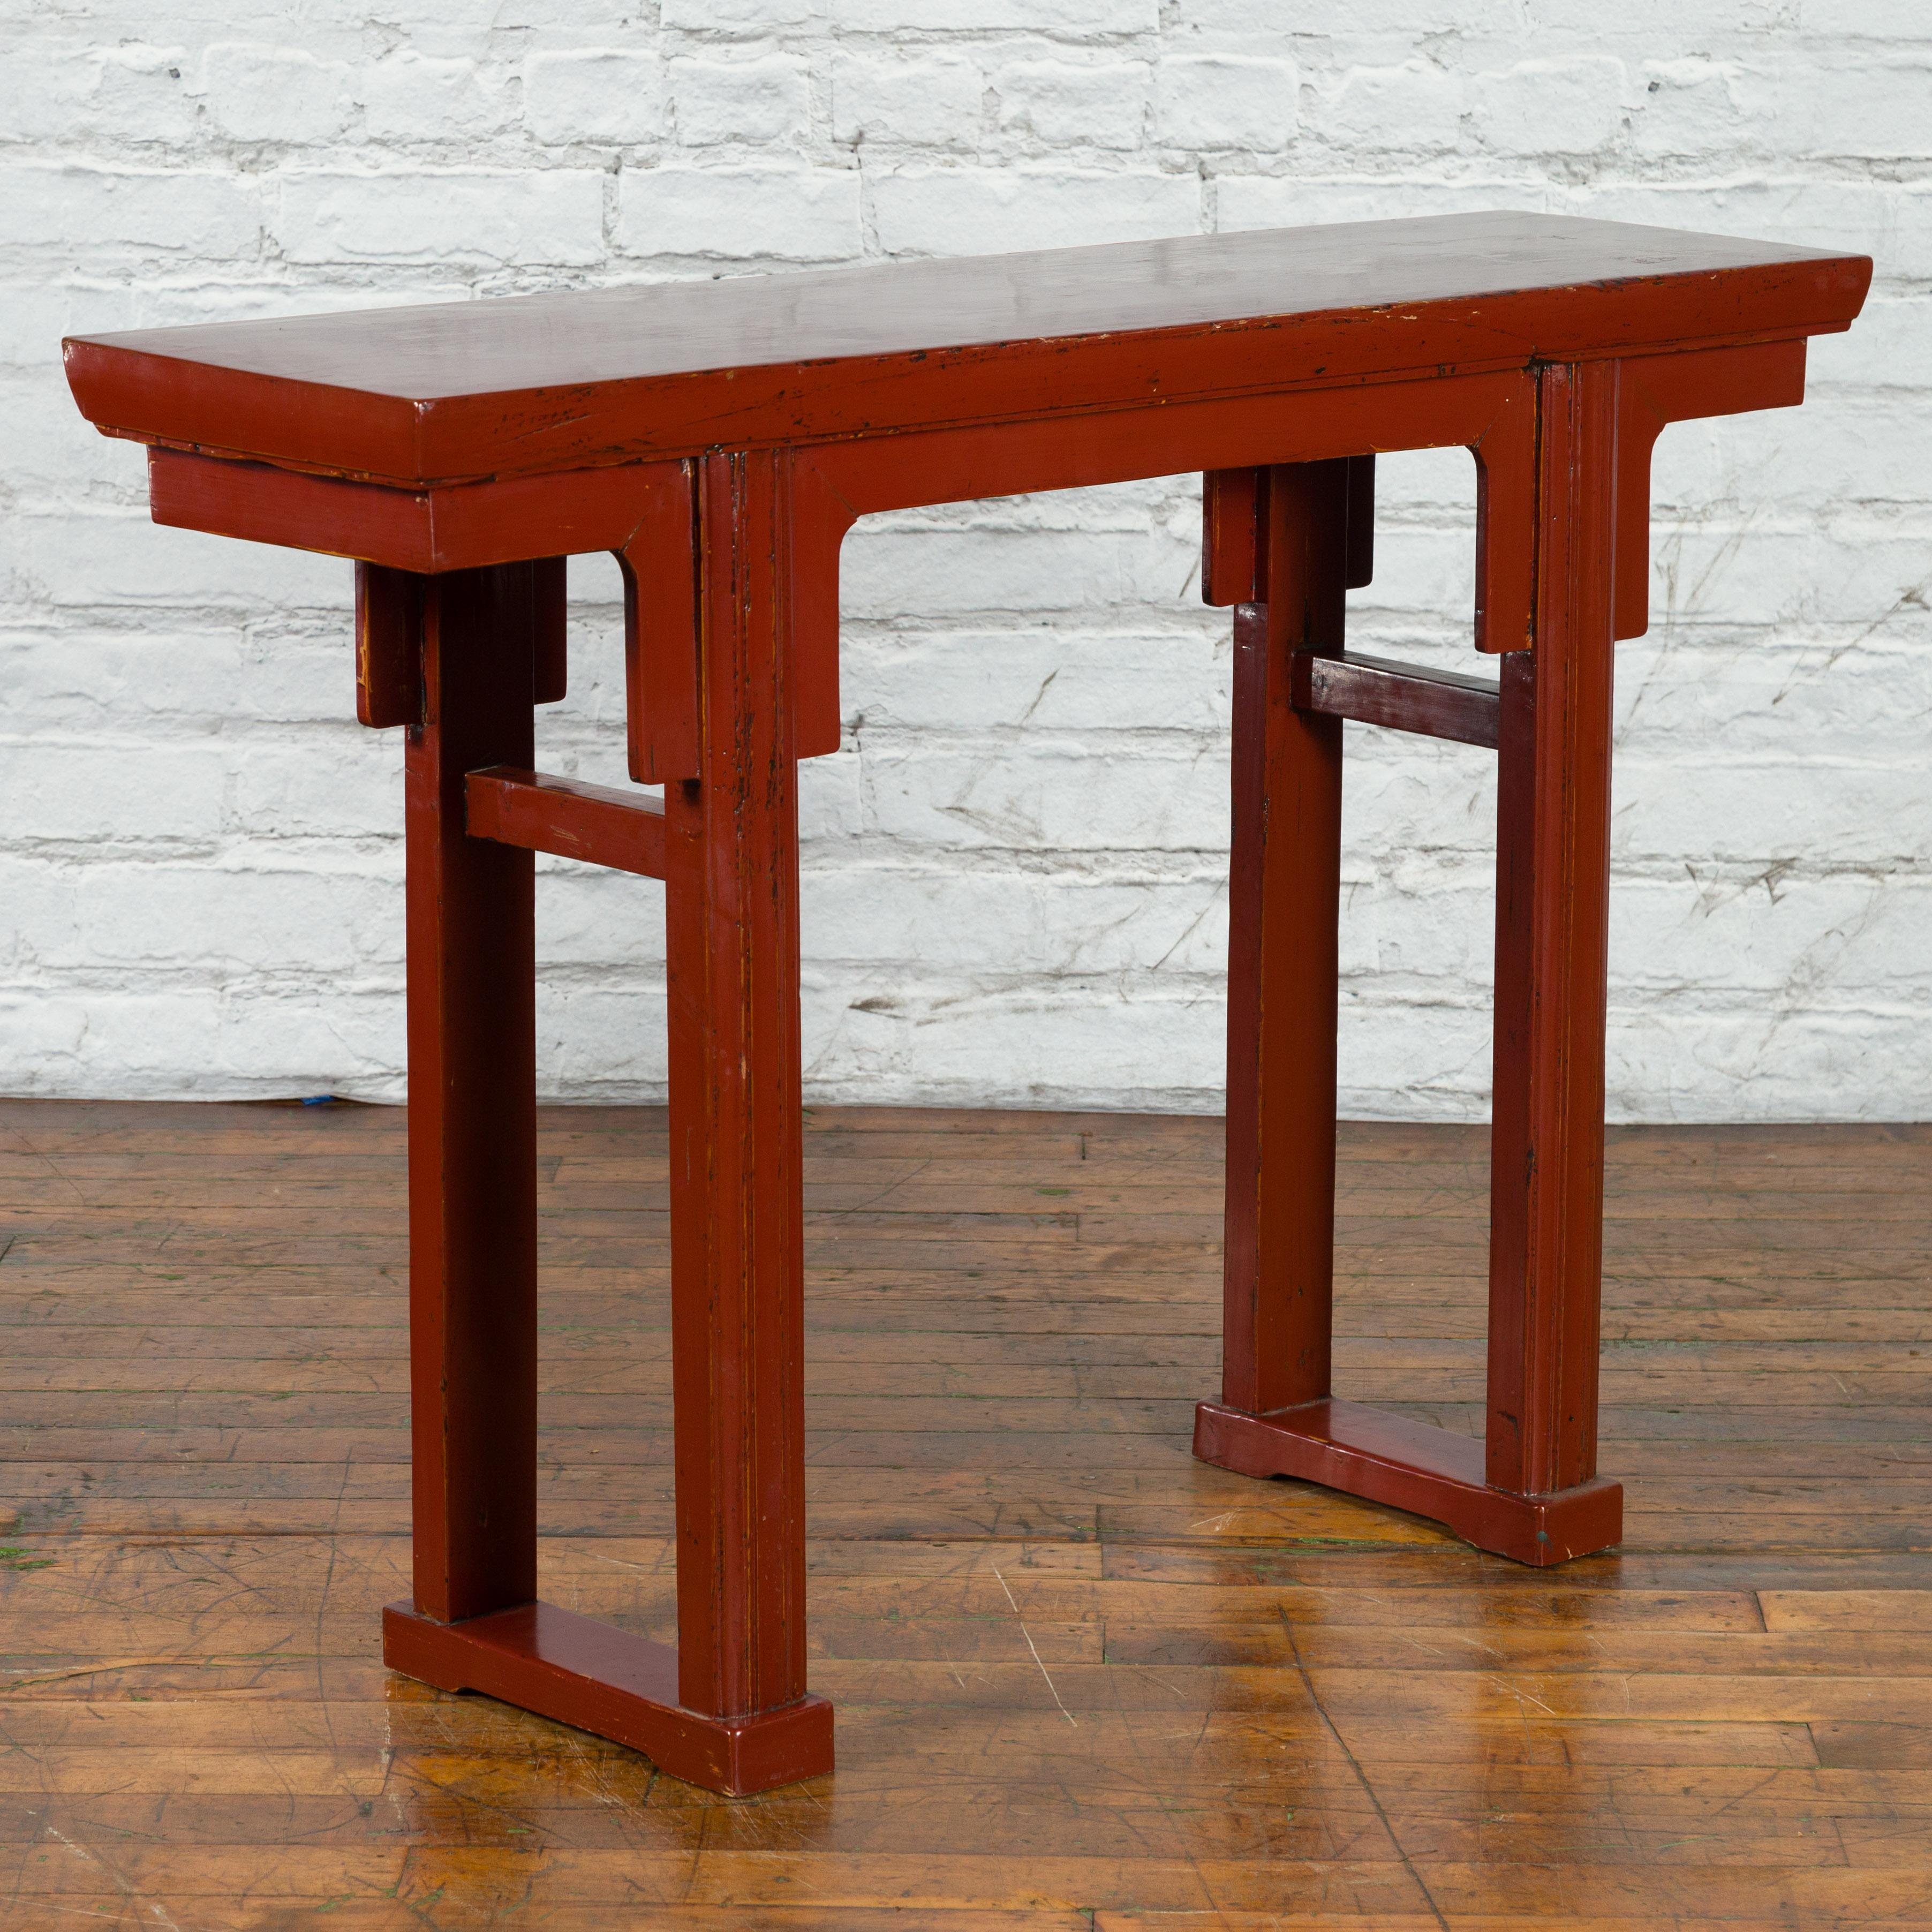 A Chinese Qing Dynasty period elmwood altar console table from the 19th century, with red lacquer and carved apron. Created in China during the Qing Dynasty, this elmwood console table features a rectangular top sitting above a simply carved apron.